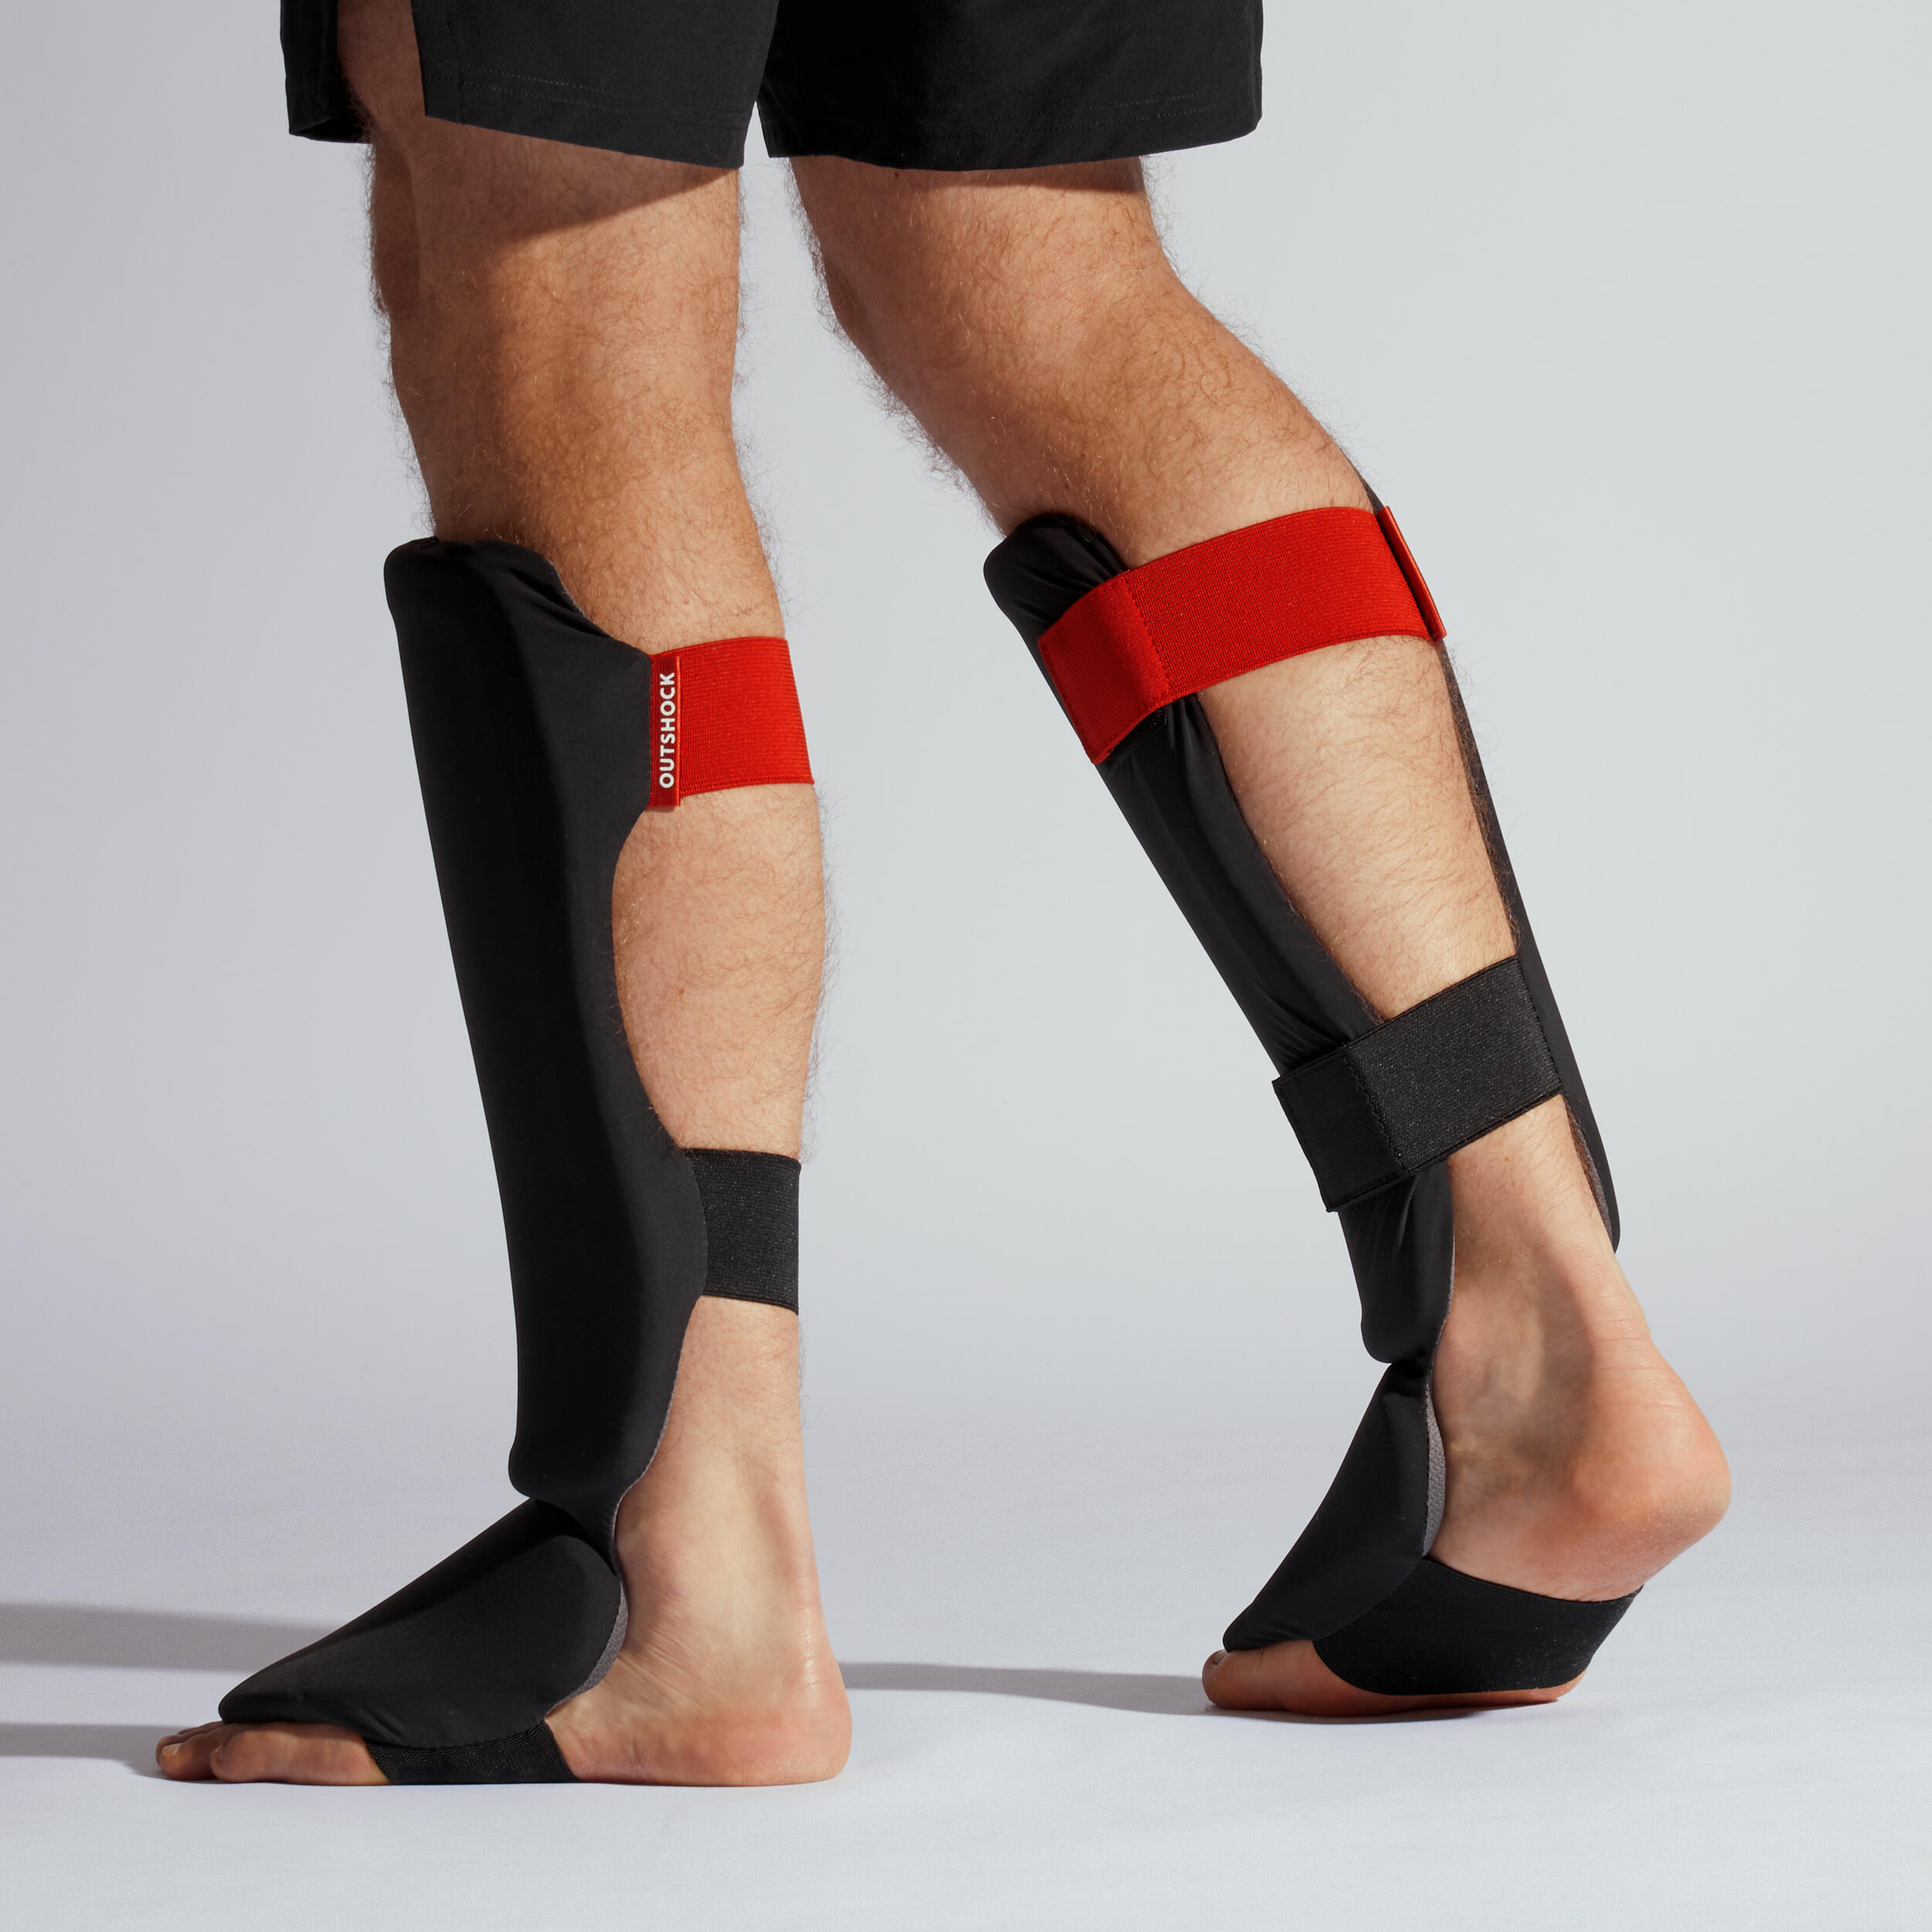 Shin and Foot Guard - 100 Ergo - Black, Cherry red, Charcoal grey -  Outshock - Decathlon